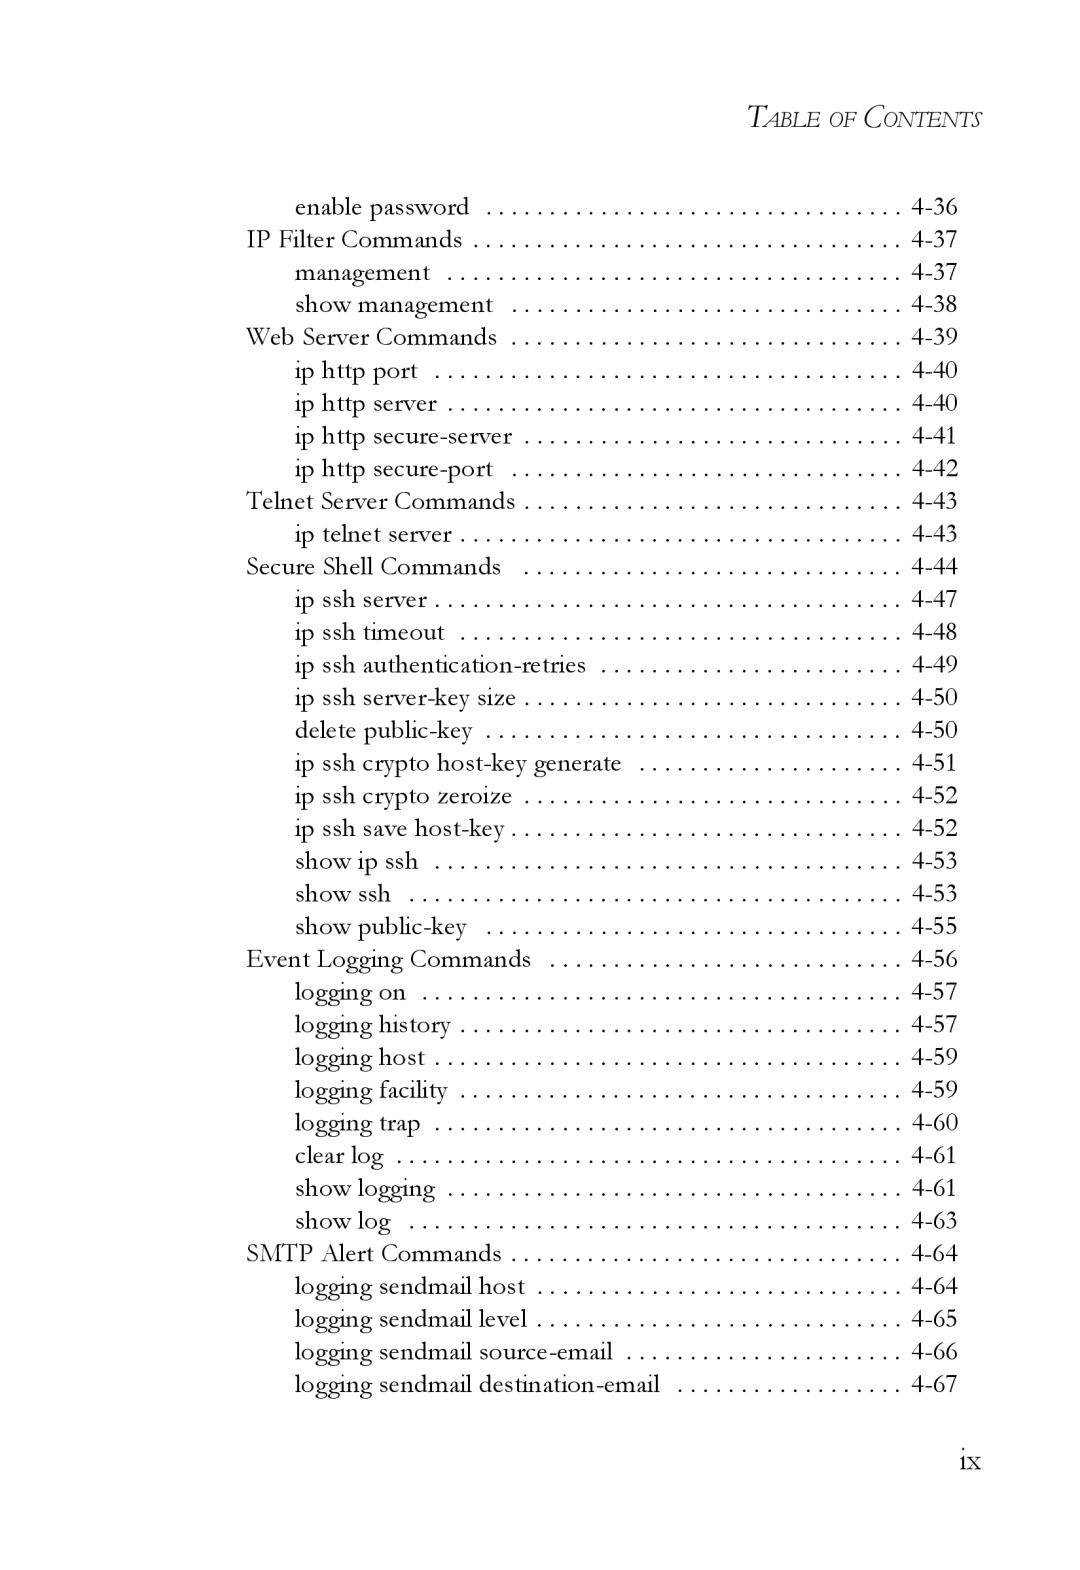 SMC Networks SMC6824M manual Table of Contents 